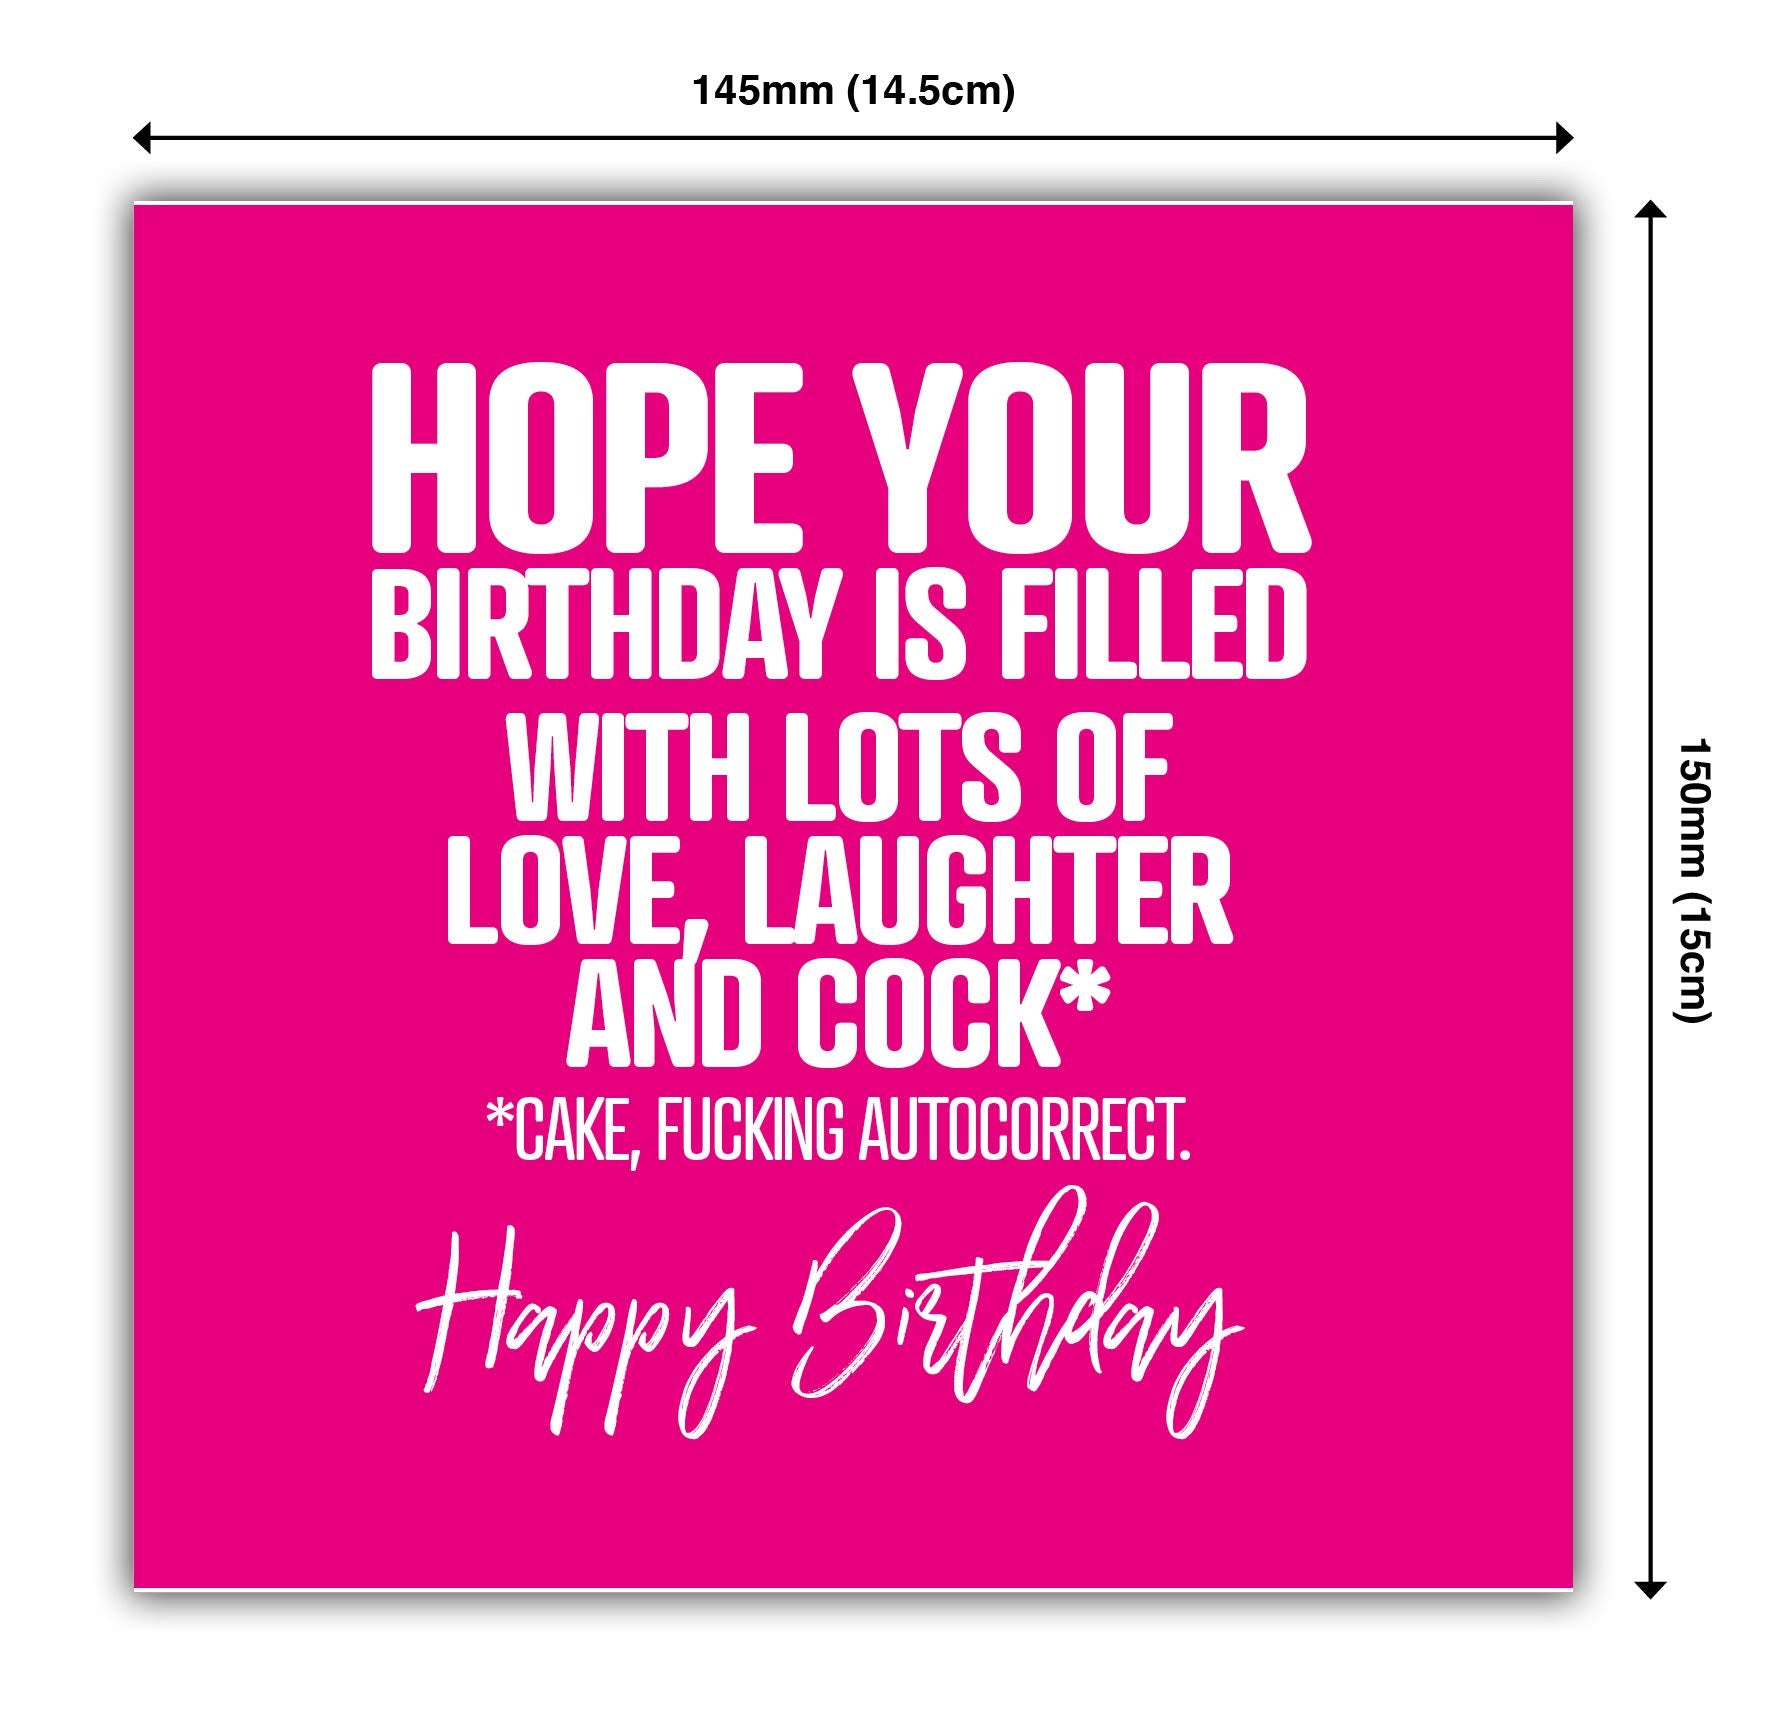 Punkcards – Rude Birthday Cards For Women – 'Hope Your Birthday Is Filled With Lots Of Love’ – Happy Birthday Card For Friends Sister Wife – Funny Card For Her